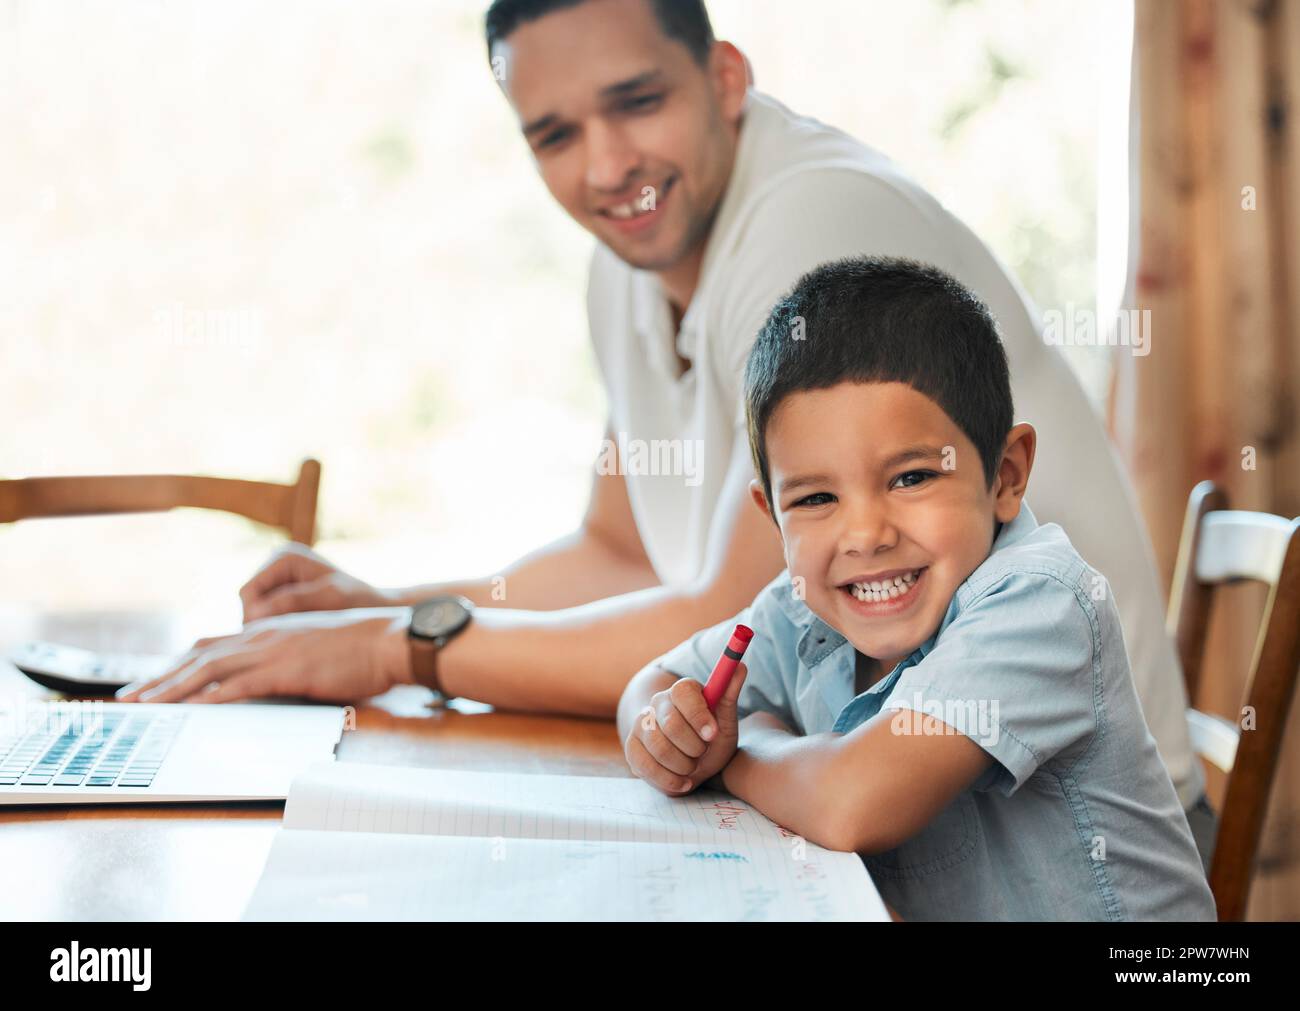 Excited preschooler boy drawing and writing with crayon at table at home while dad works remotely. Child sitting with parent during online education c Stock Photo